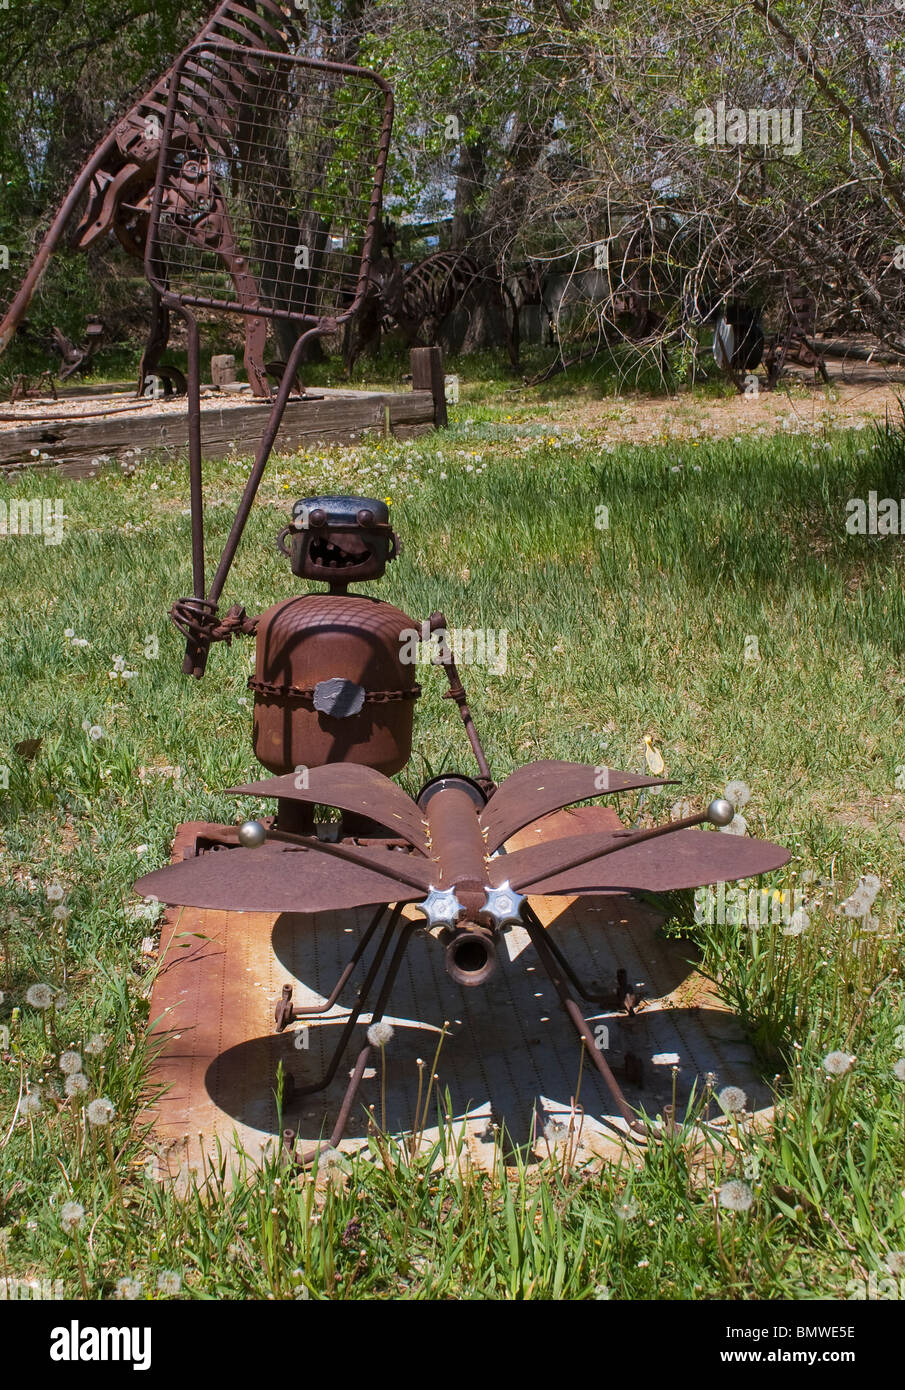 Swetsville Zoo features metal sculptures by Bill Swets in Fort Collins Colorado Stock Photo